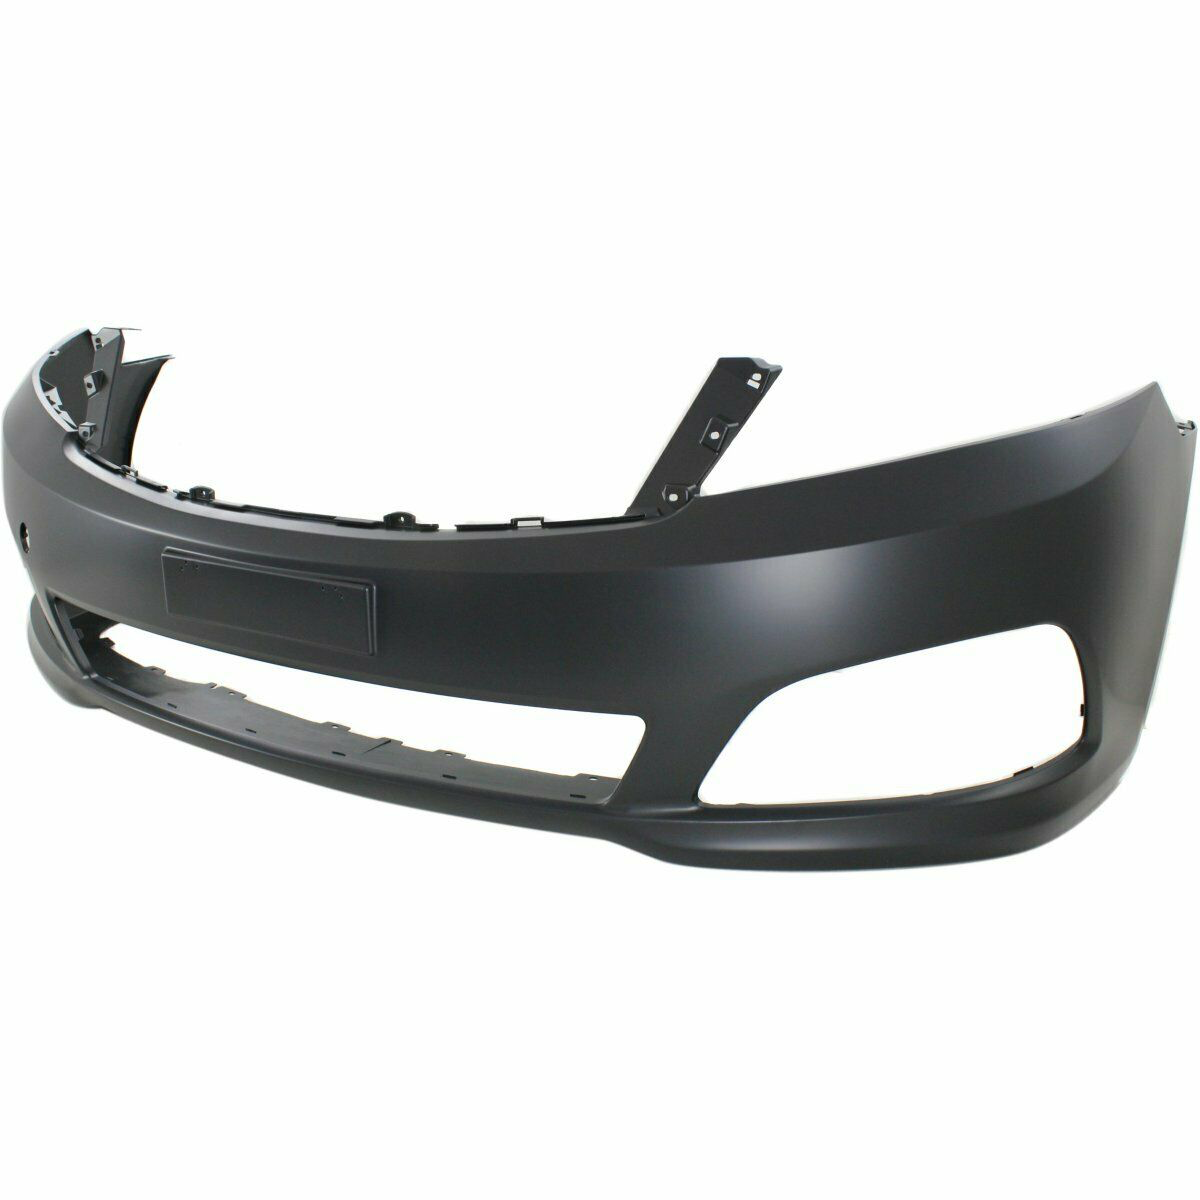 2009-2010 Kia Optima Front Bumper Painted to Match